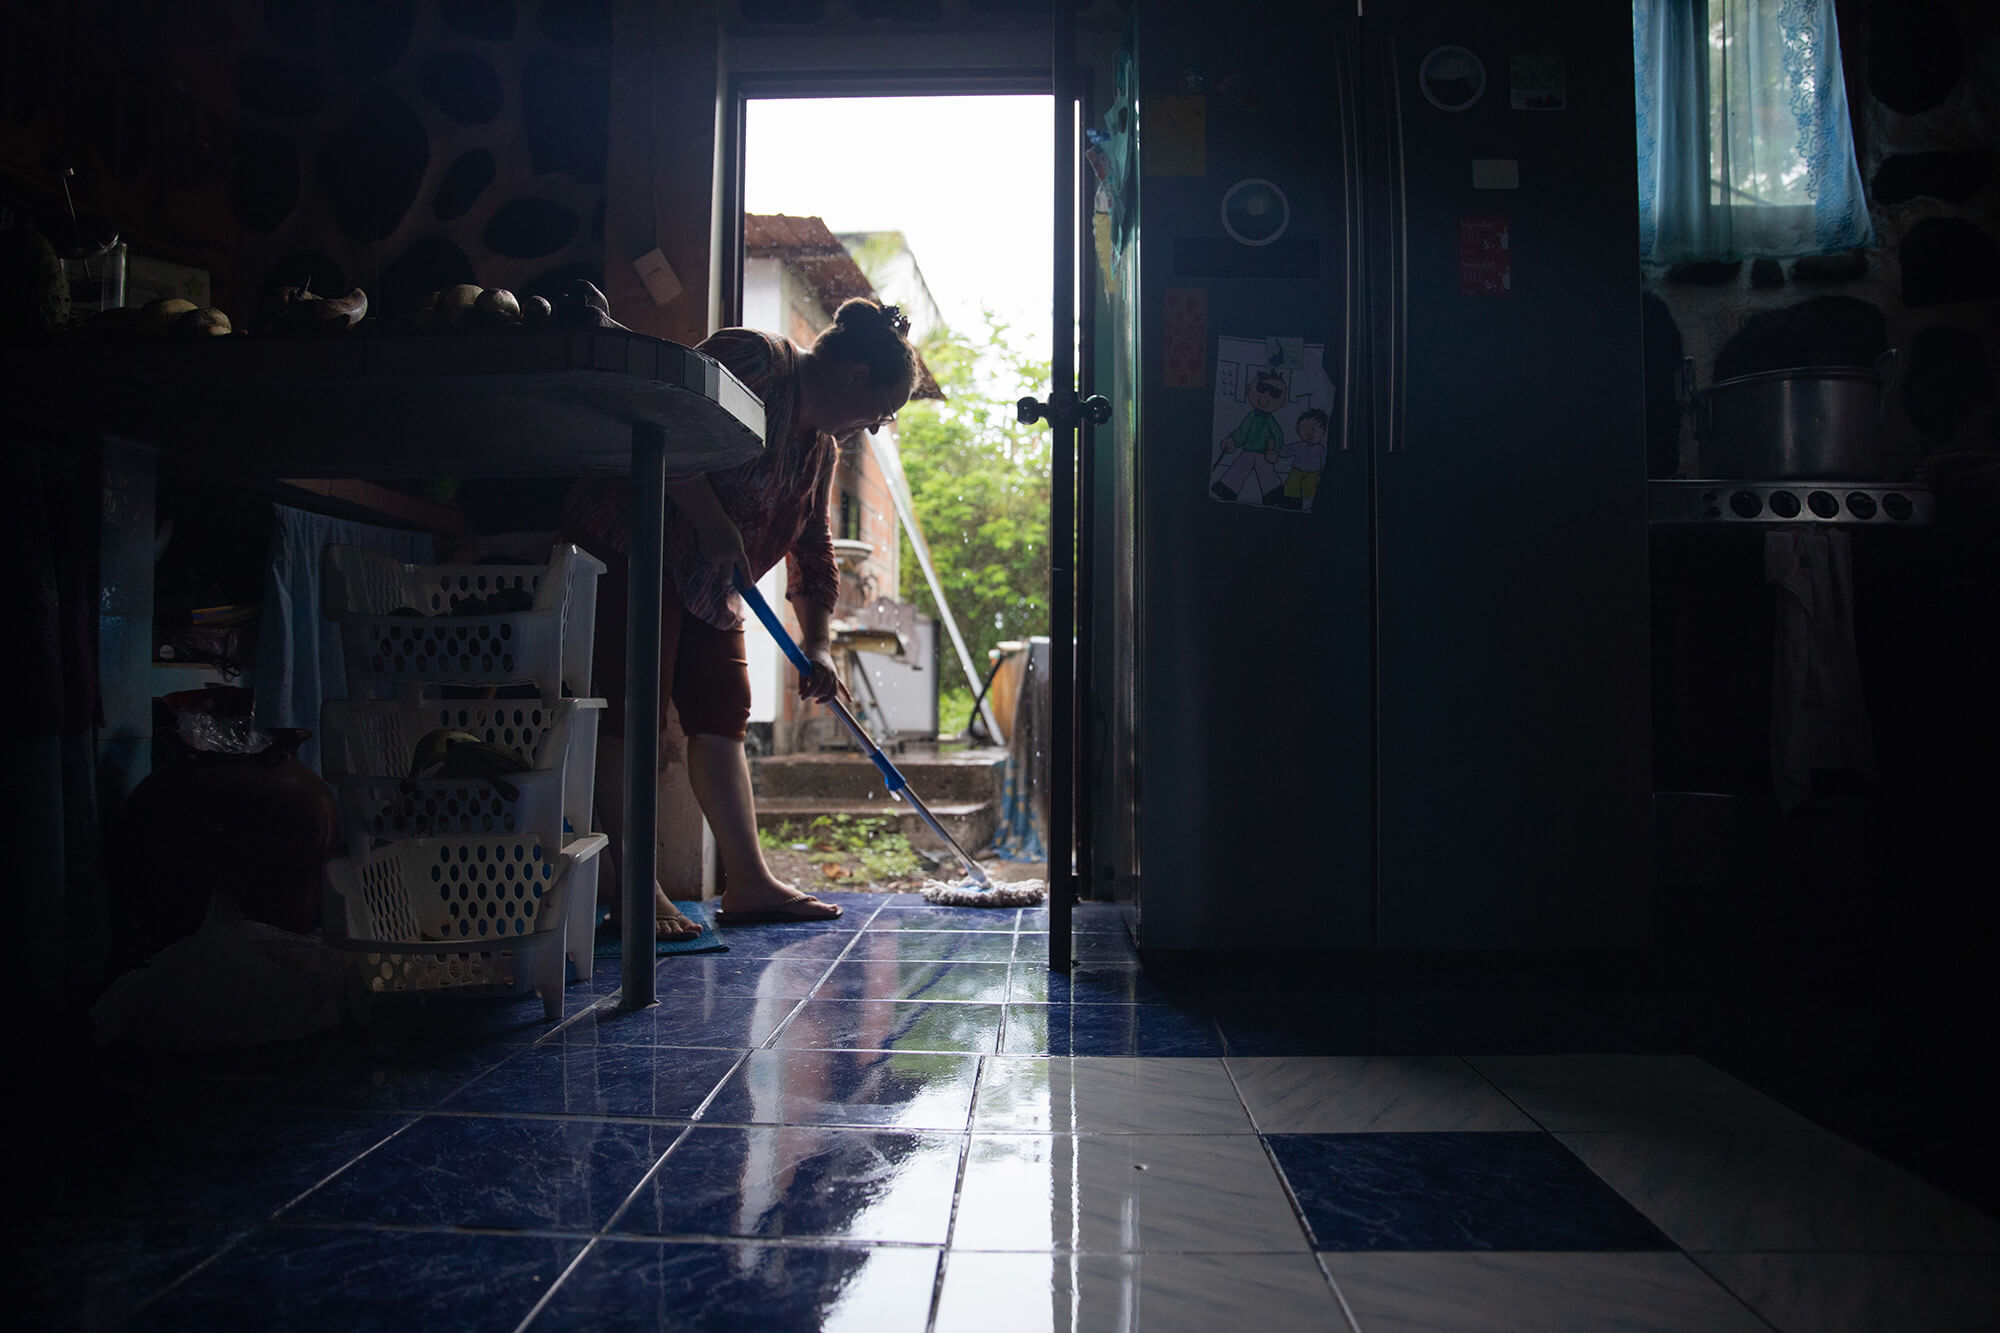 Alava mops her blue, tile kitchen floor as rain falls in the background. Alava is framed by a doorway that leads outside. To the right of the image is the kitchen fridge, which is silver, and to the left is a countertop.